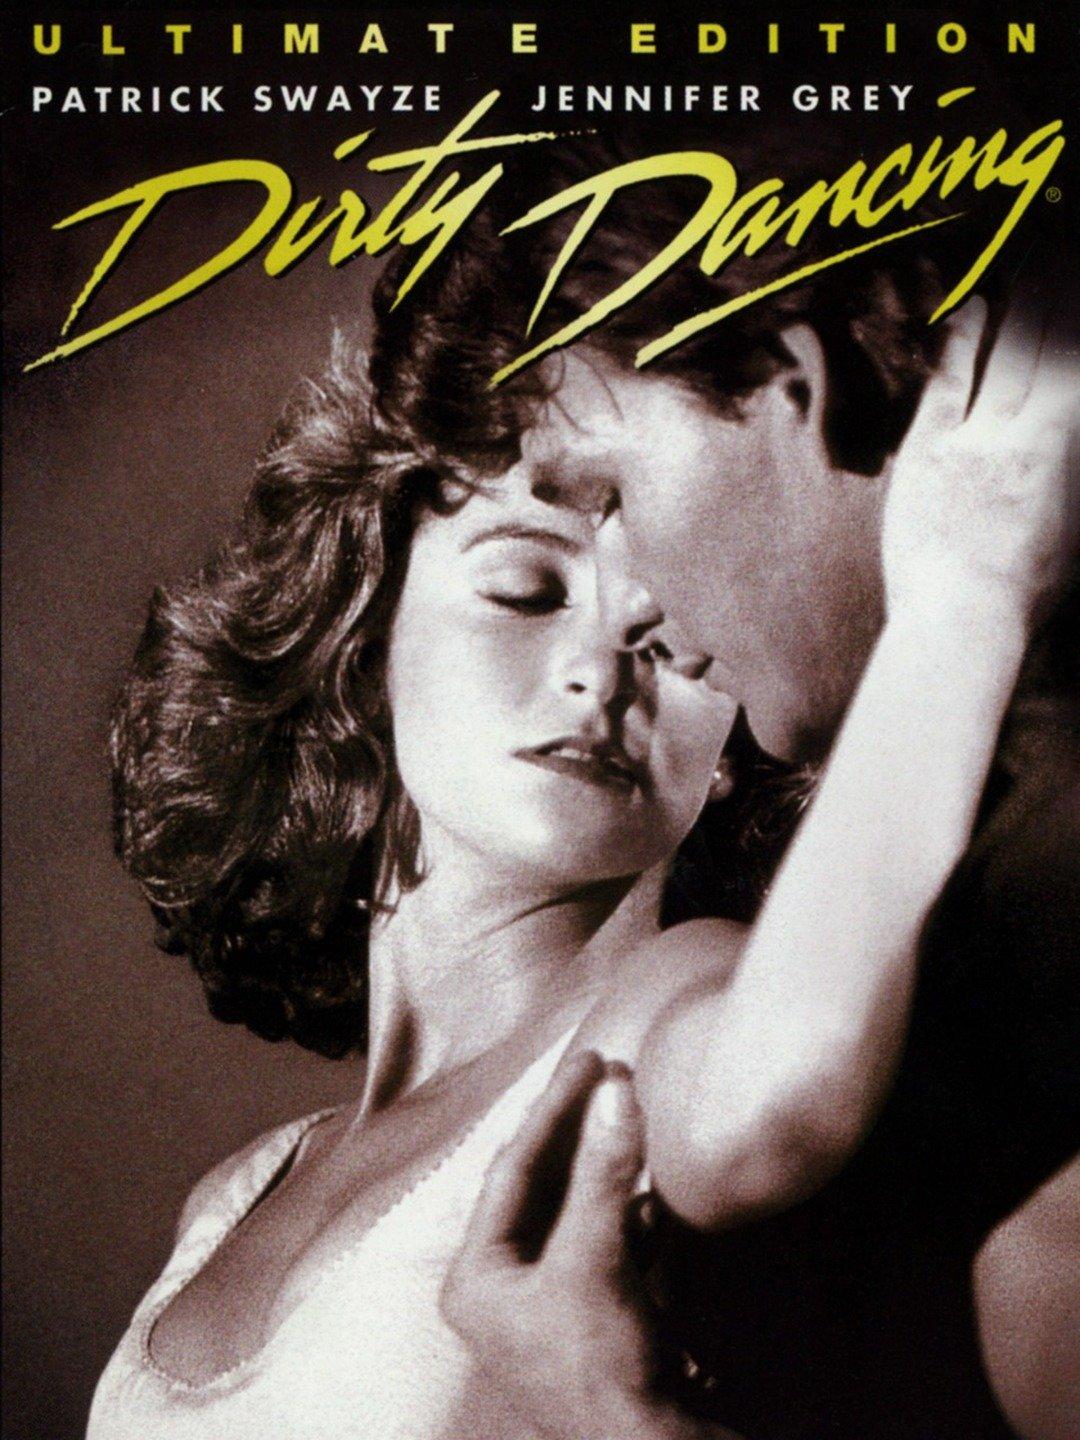 Movie poster for "Dirty Dancing." (Artisan entertainment/Vestron Pictures)